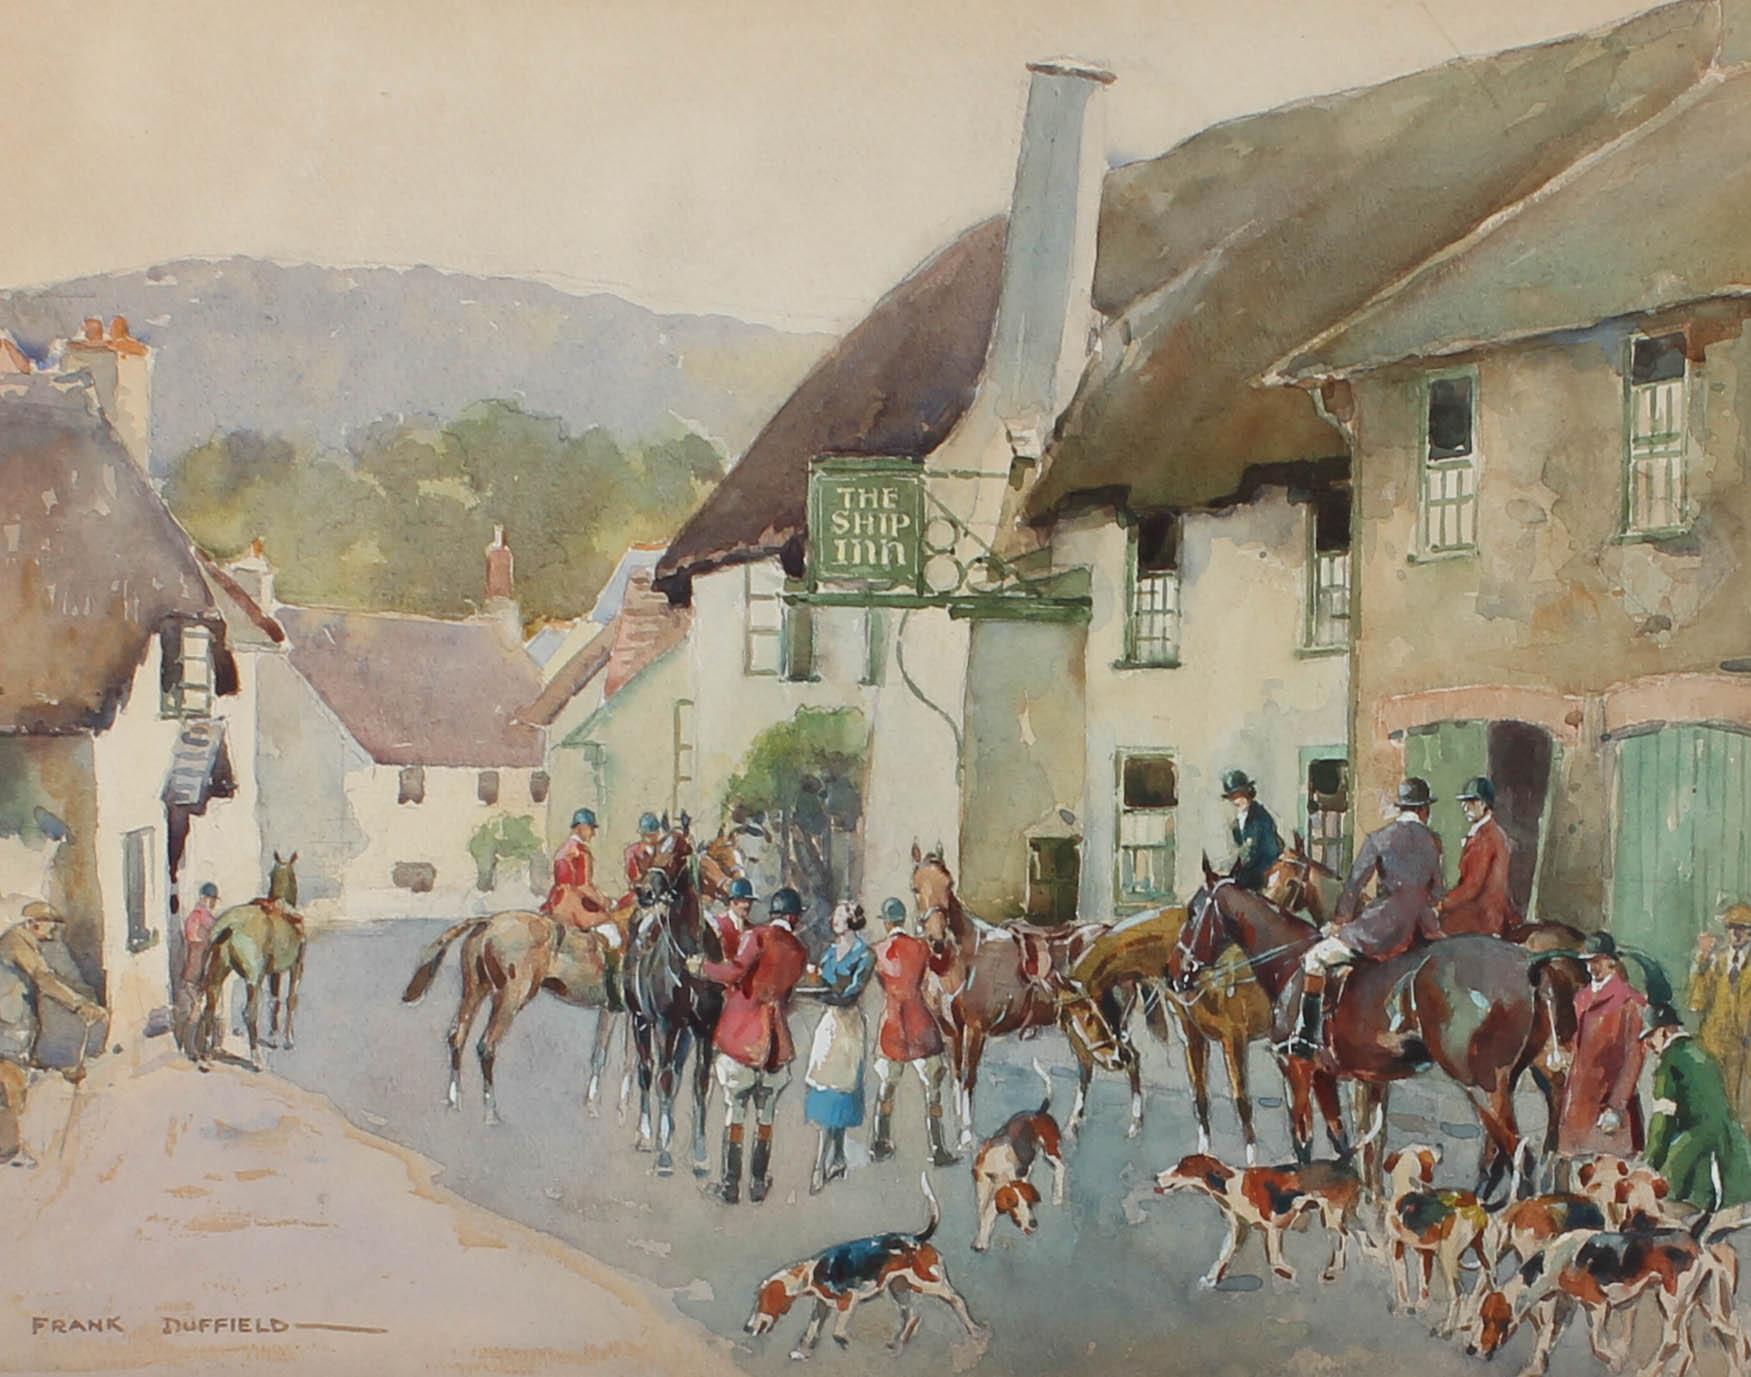 This lively scene depicts riders gathering together with their horses and hounds outside The Ship Inn in Porlock, Devon. With graphite details. Signed to the lower left. Presented in a glazed wooden frame. On paper.









